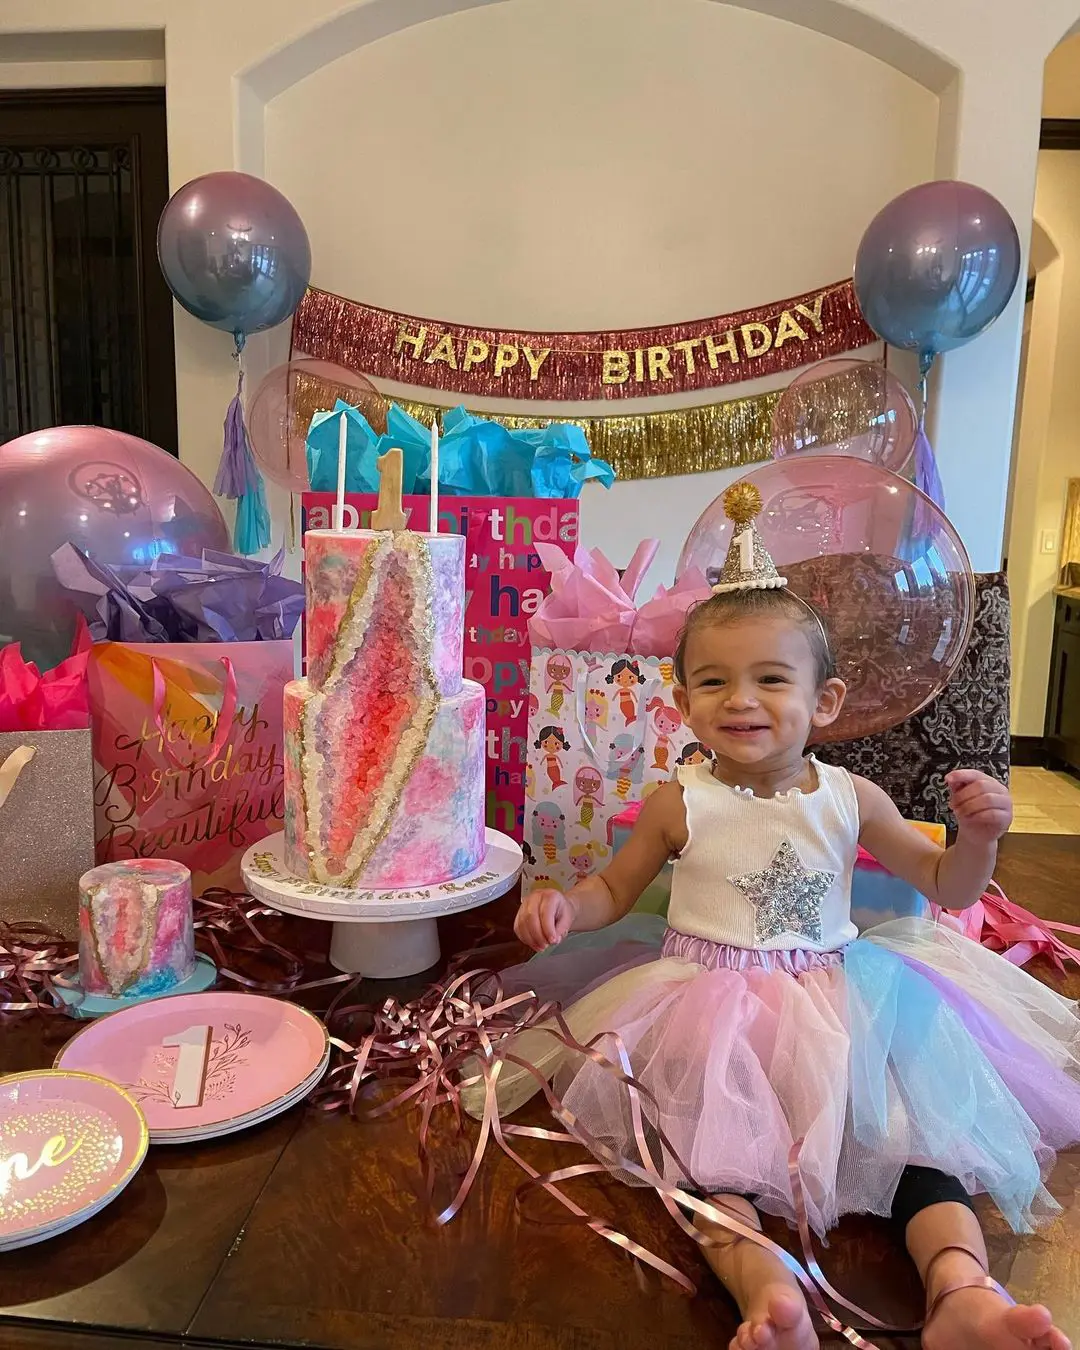 The Miller celebrated Remi's 1st birthday in January earlier this year